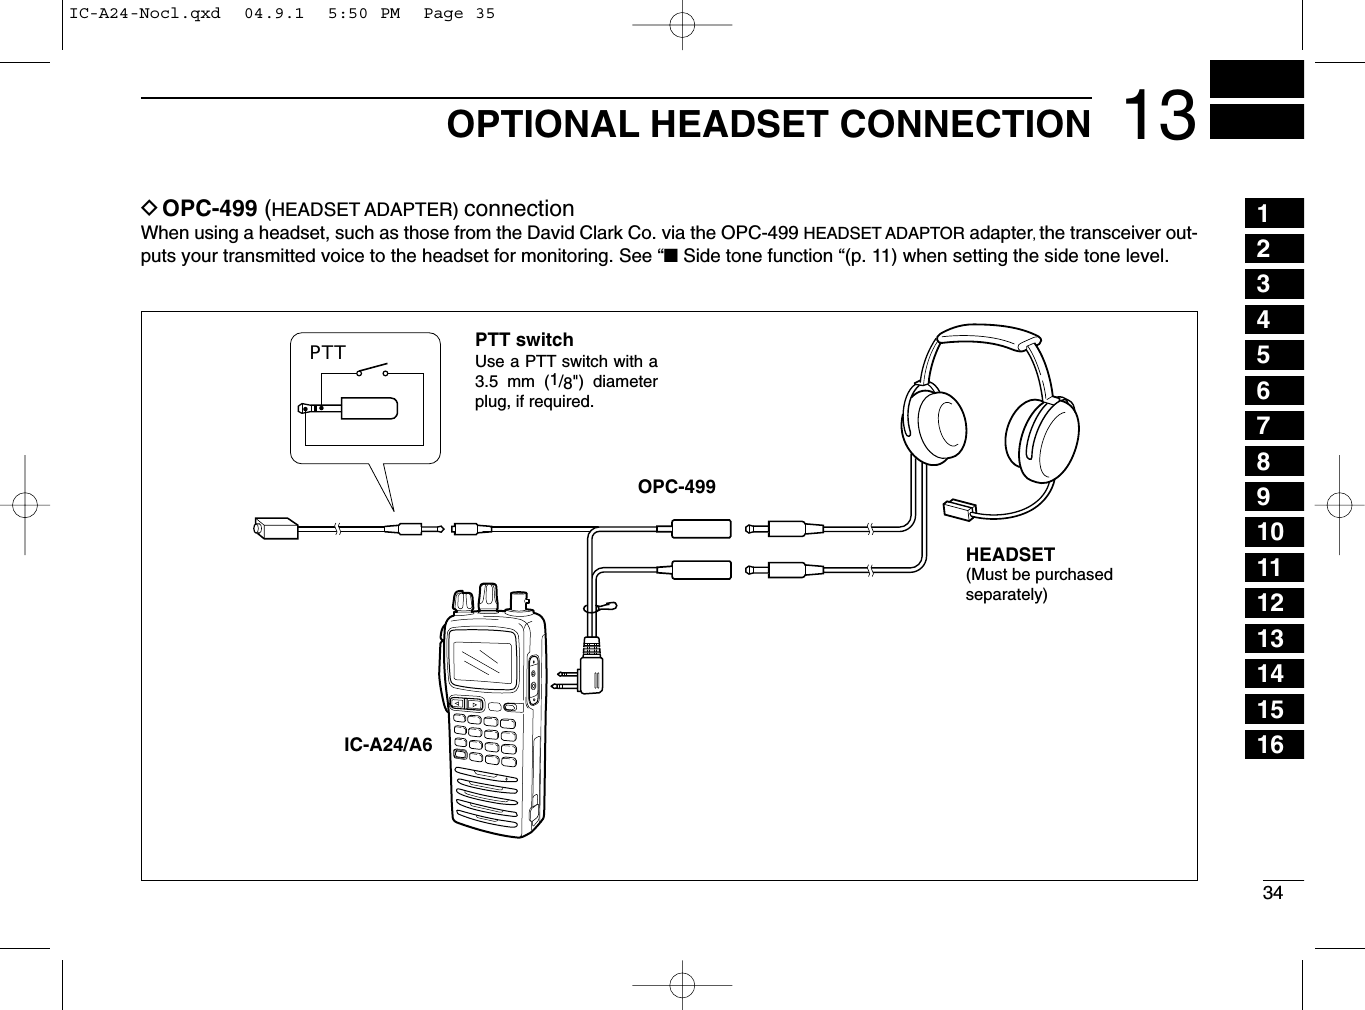 3413OPTIONAL HEADSET CONNECTIONDOPC-499 (HEADSET ADAPTER) connectionWhen using a headset, such as those from the David Clark Co. via the OPC-499 HEADSET ADAPTOR adapter, the transceiver out-puts your transmitted voice to the headset for monitoring. See “■Side tone function “(p. 11) when setting the side tone level.PTTOPC-499IC-A24/A6PTT switchHEADSET(Must be purchasedseparately)Use a PTT switch with a 3.5 mm (1/8&quot;) diameter plug, if required.12345678910111213141516IC-A24-Nocl.qxd  04.9.1  5:50 PM  Page 35